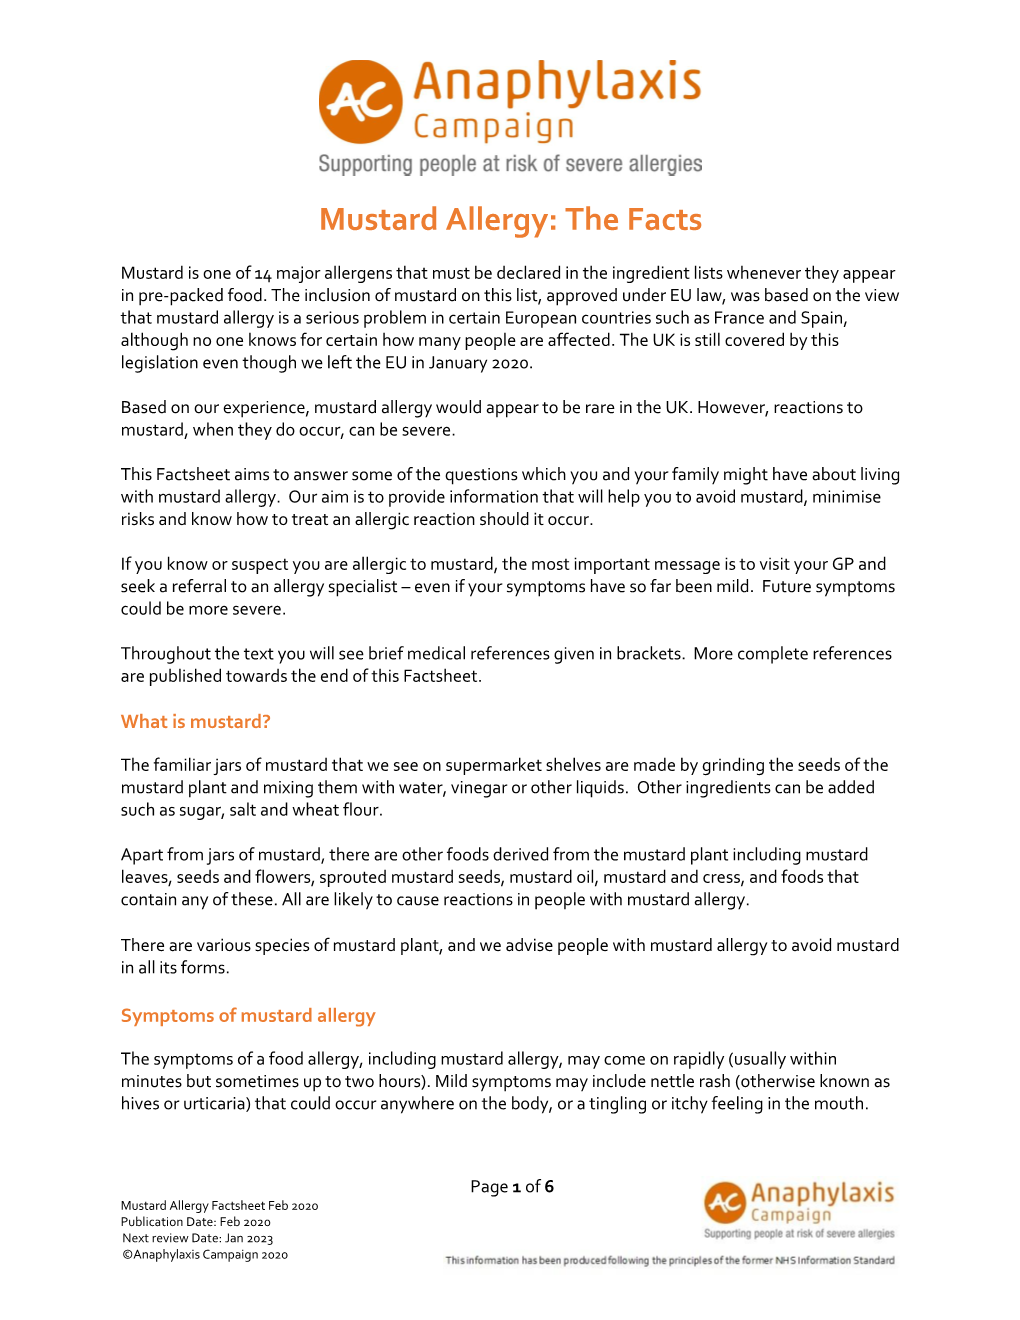 Mustard Allergy: the Facts